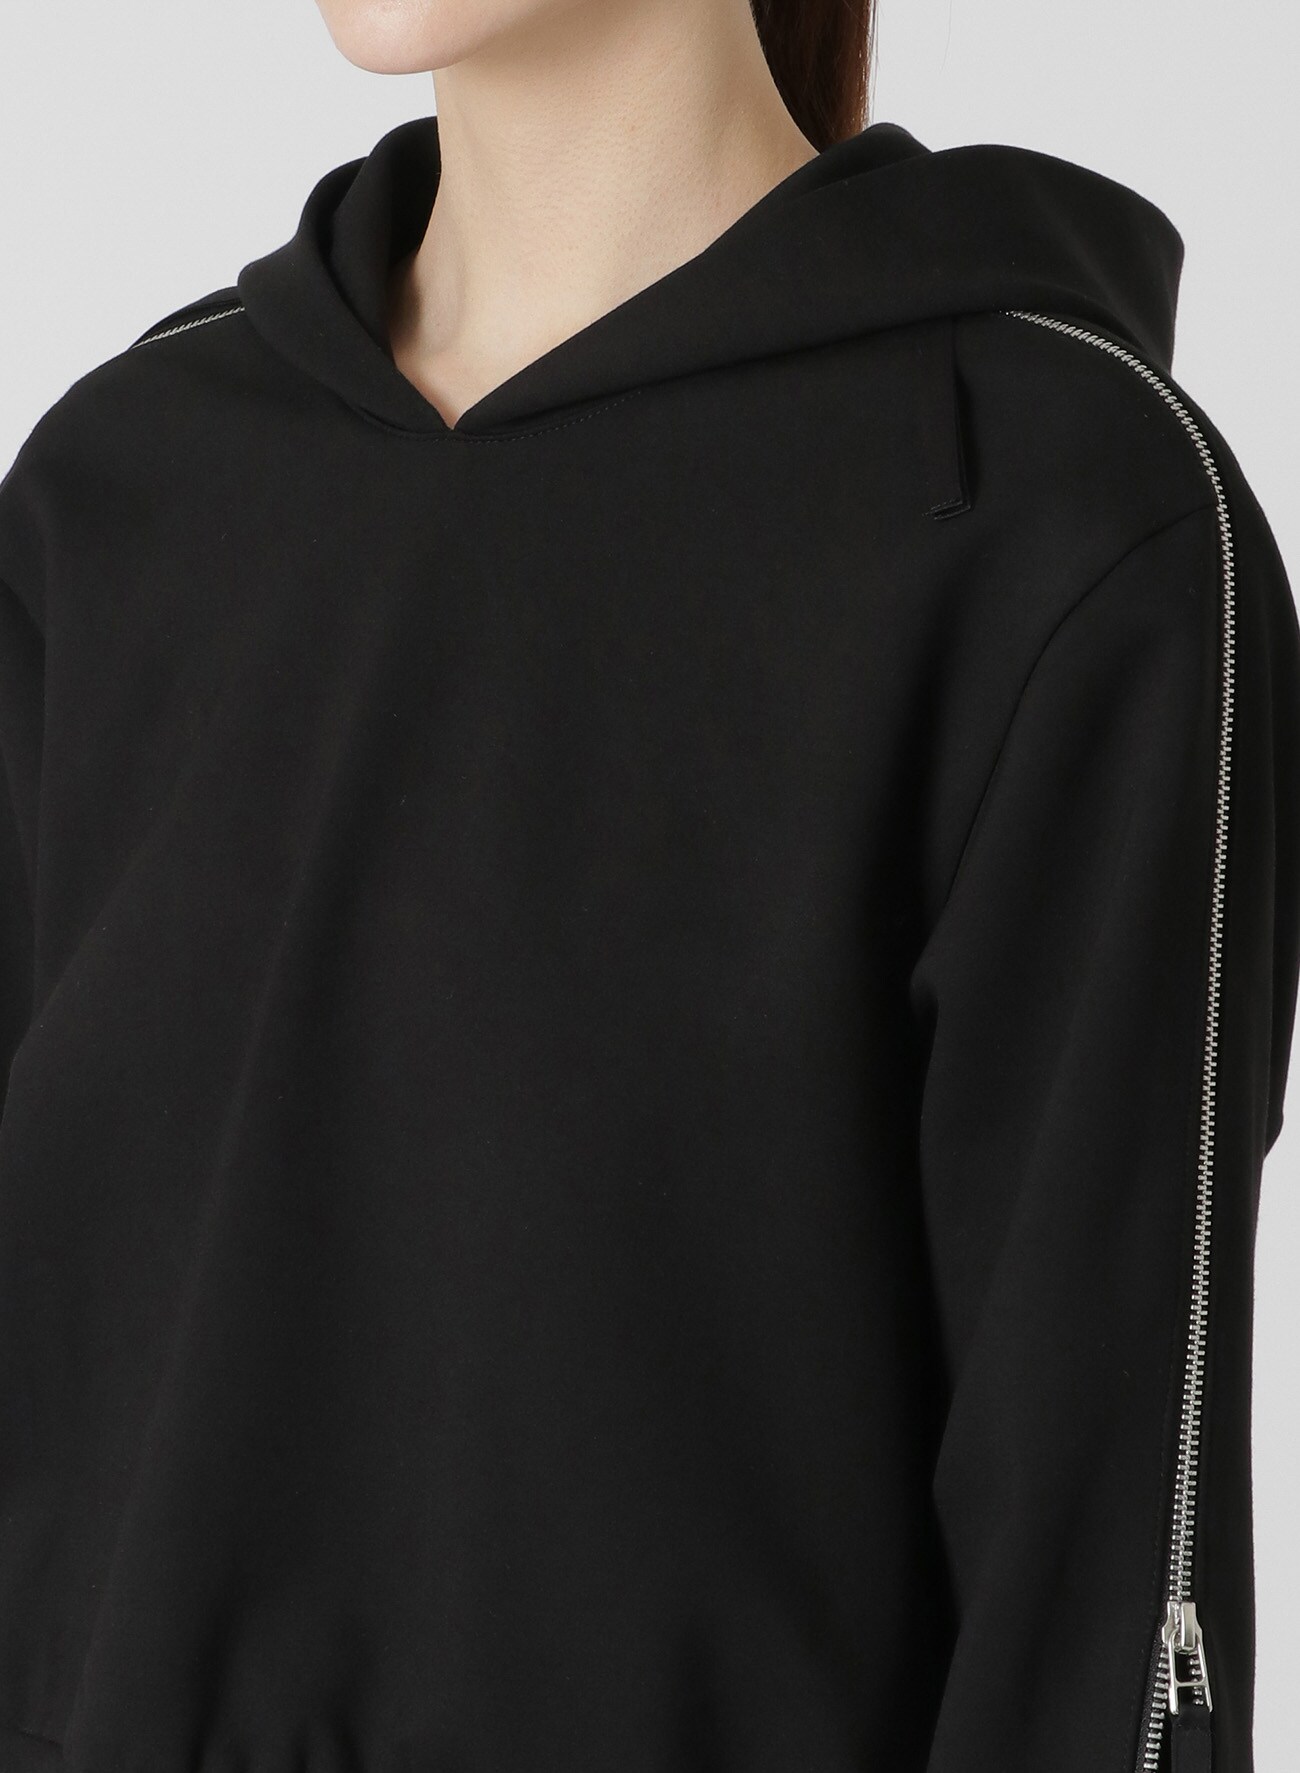 PONTE ROMA PULLOVER HOODIE WITH SLEEVE ZIPPERS(S Black): LIMI feu